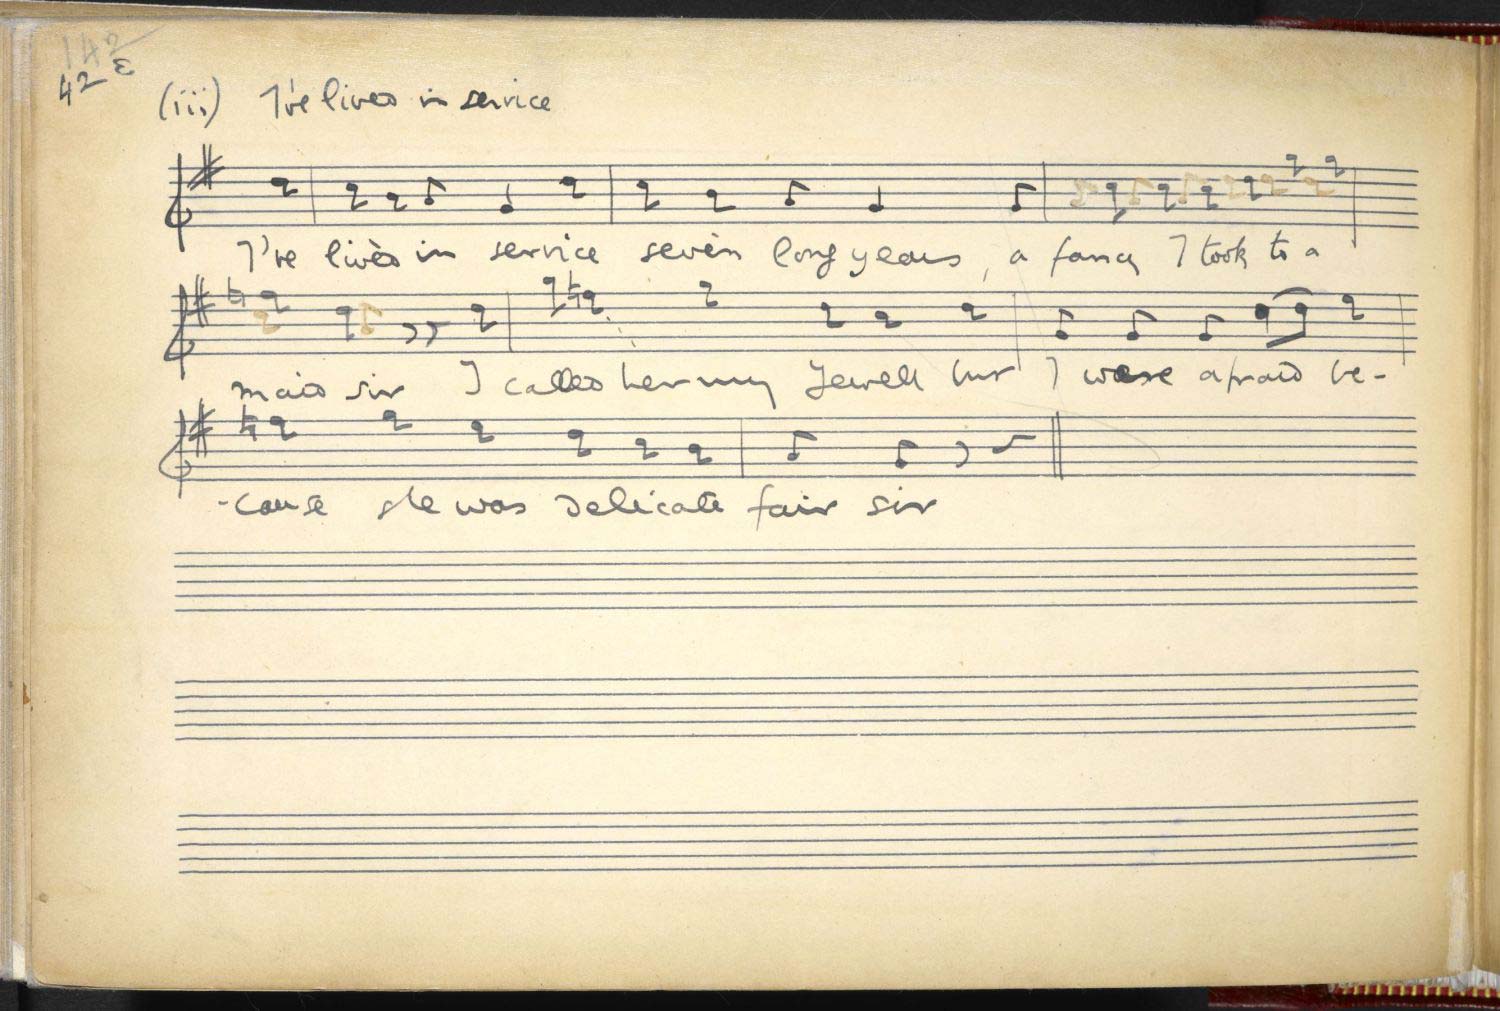 Handwritten score for "I've Lived in Service"